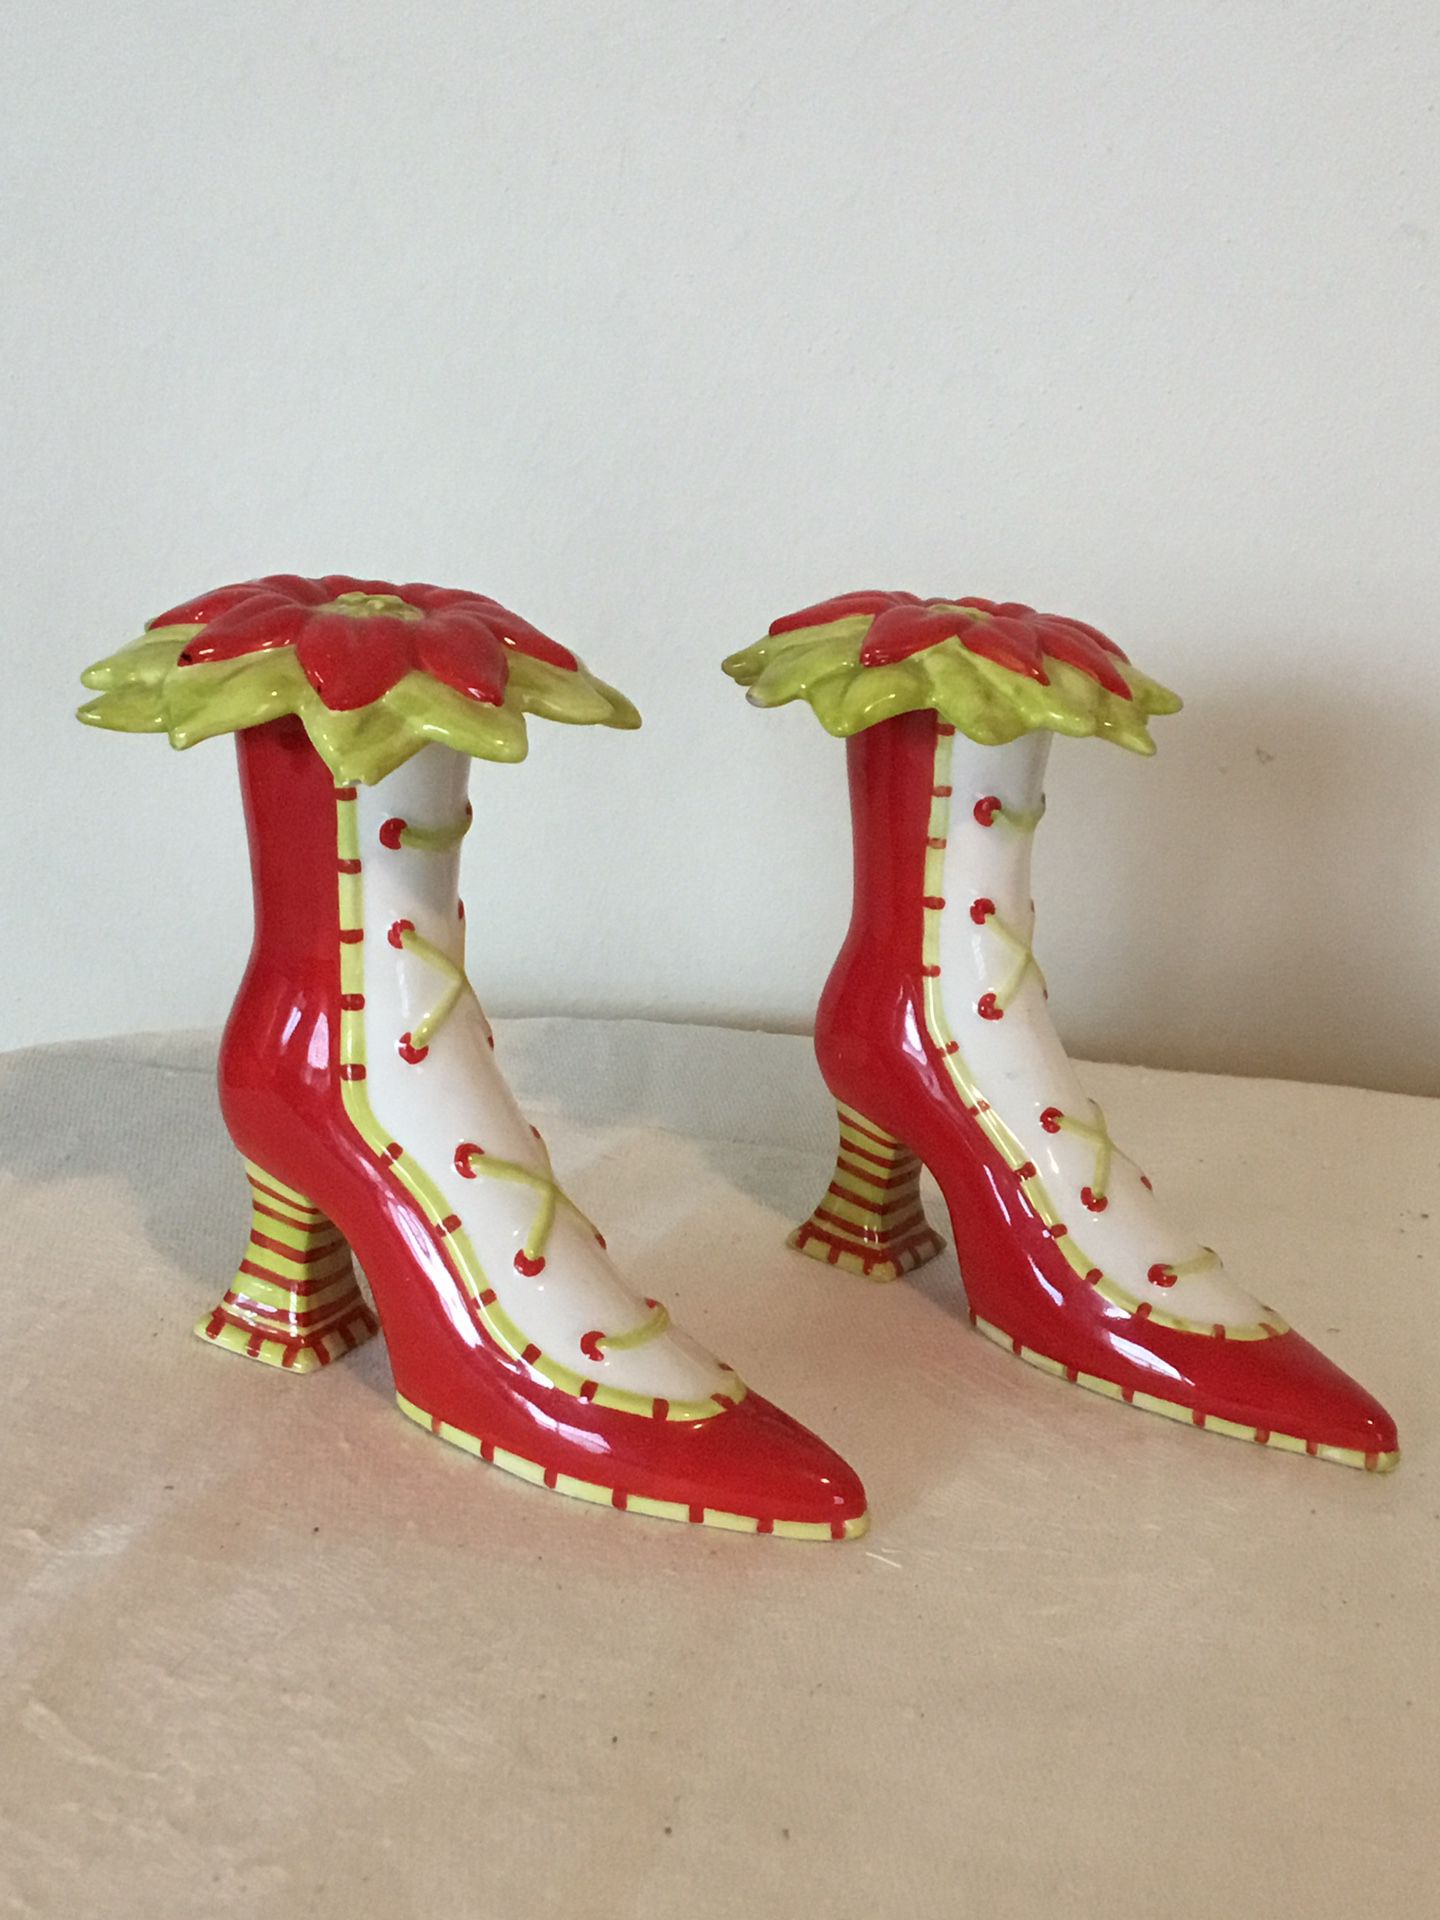 High Heeled Salt & Pepper Ceramic Shakers Designed By Patience Brewster Approximately 5” High